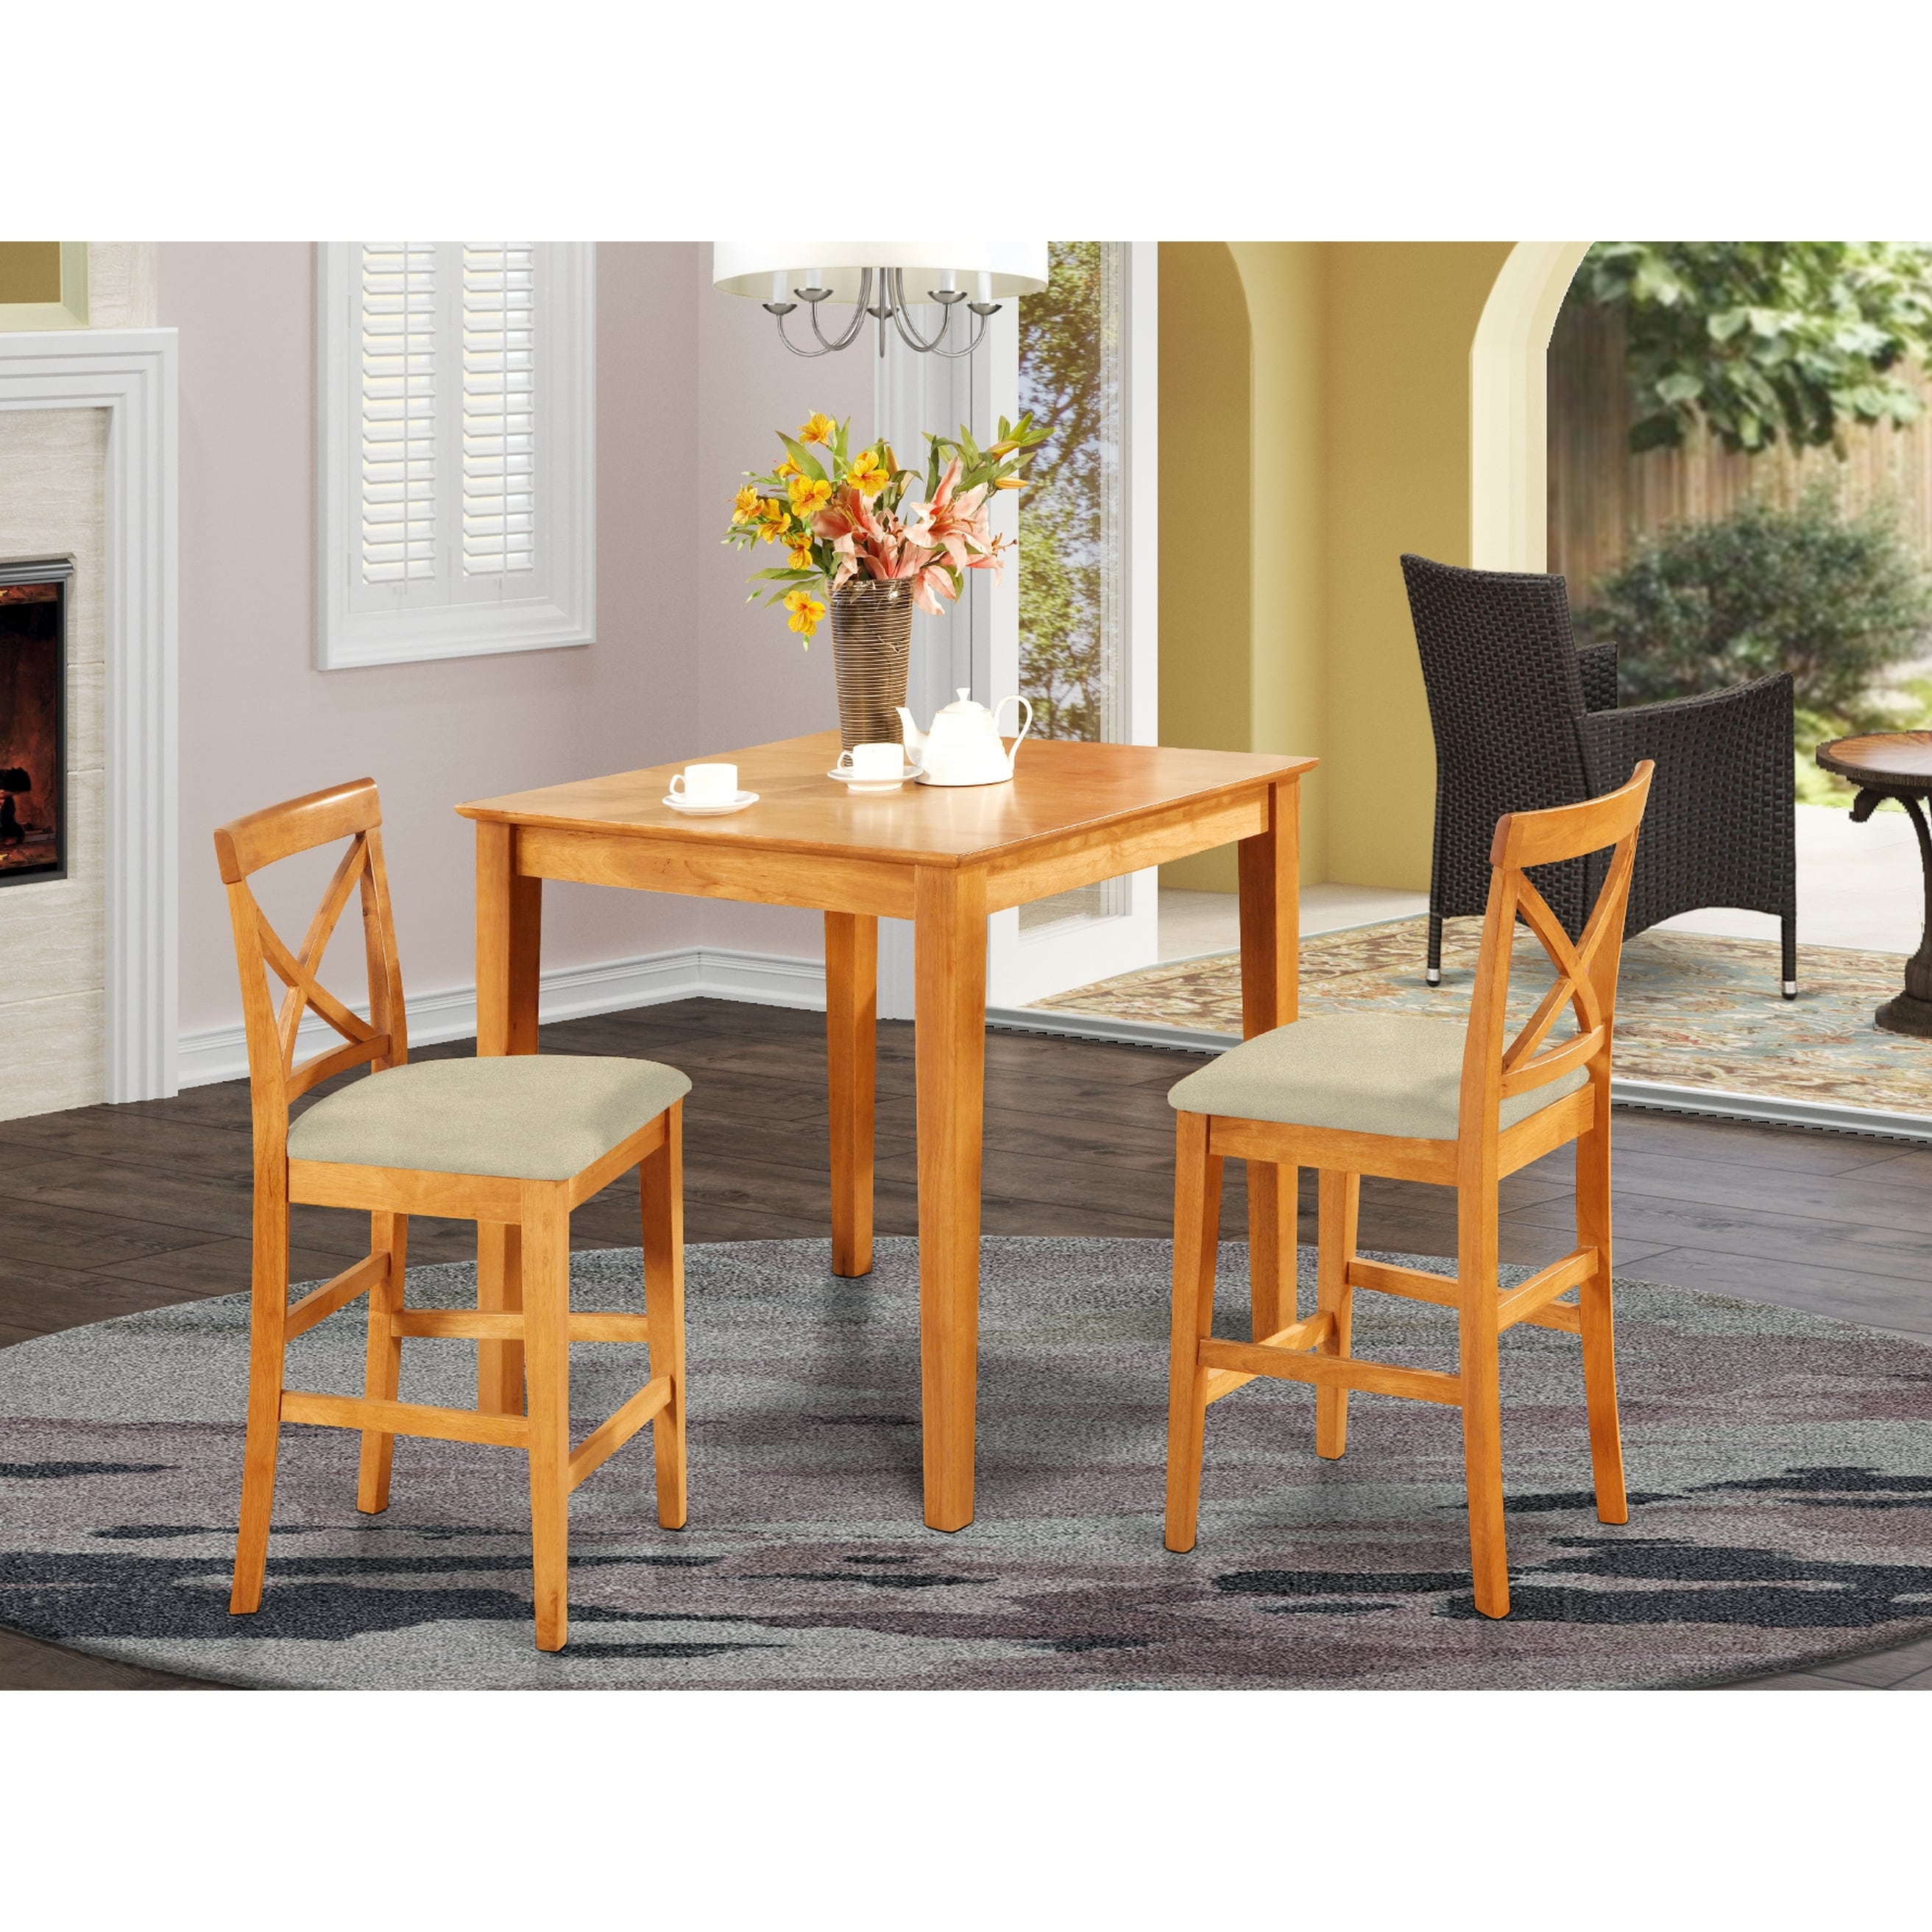 Oak Pub Table And 2 Kitchen Counter Chairs 3 Piece Dining Set On Sale Overstock 10201191